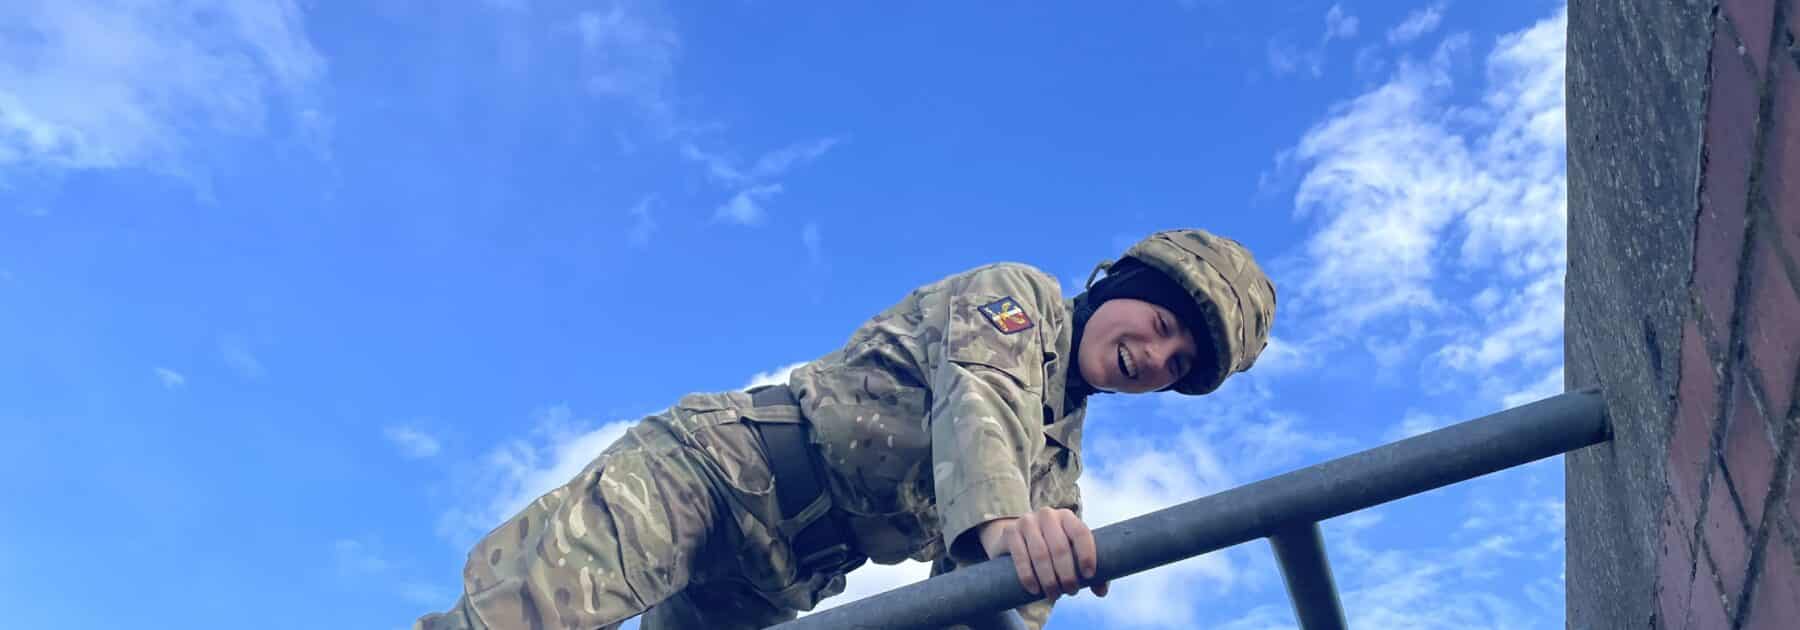 Caterham & Trinity Cadets Join Forces at CCF JNCO Camp